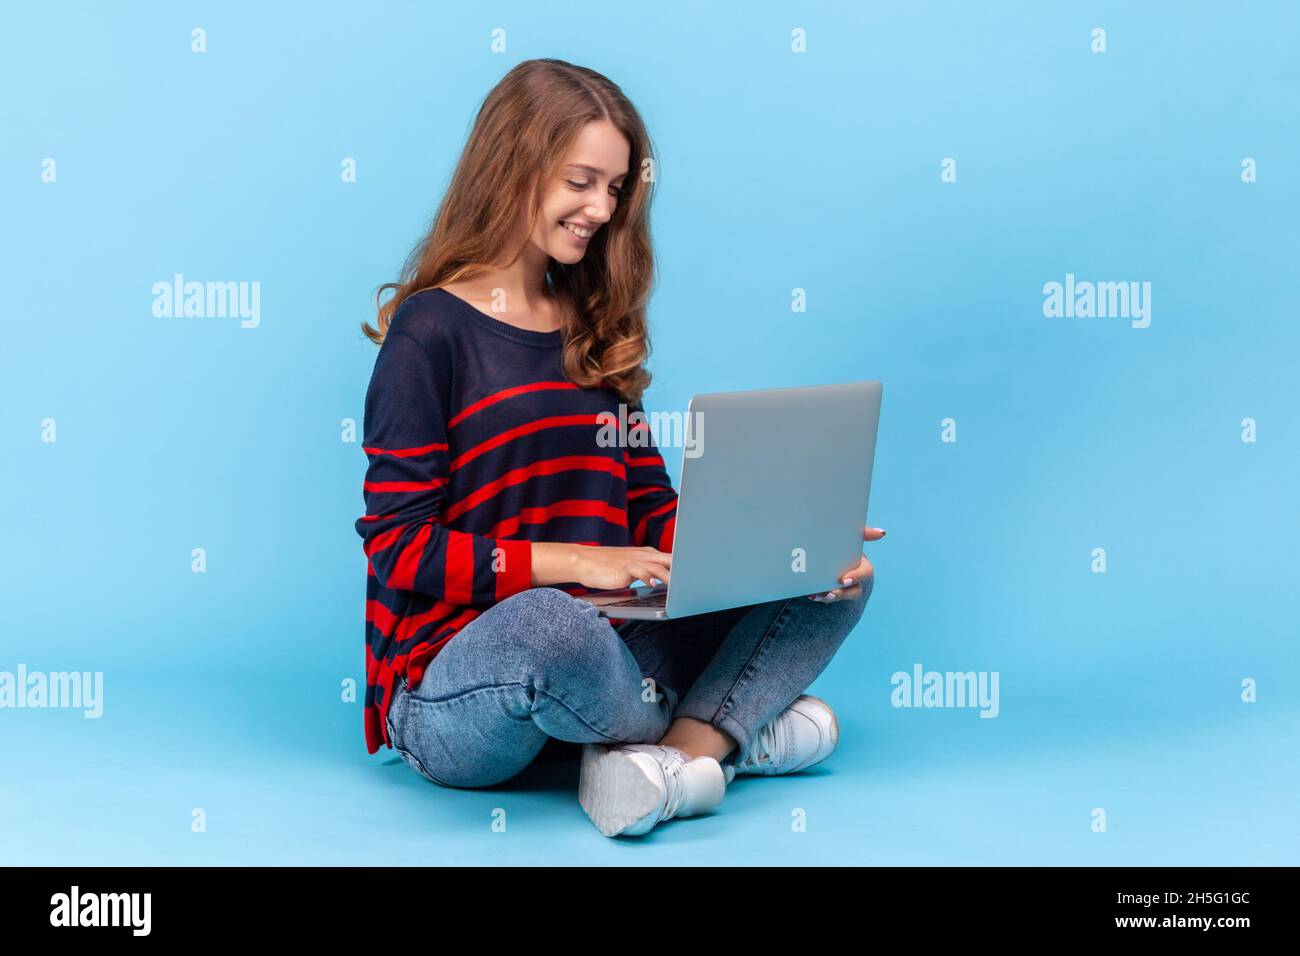 Positive woman wearing striped casual style sweater, sits with crossed legs and working online on lap top, being satisfied with her freelance job. Indoor studio shot isolated on blue background. Stock Photo